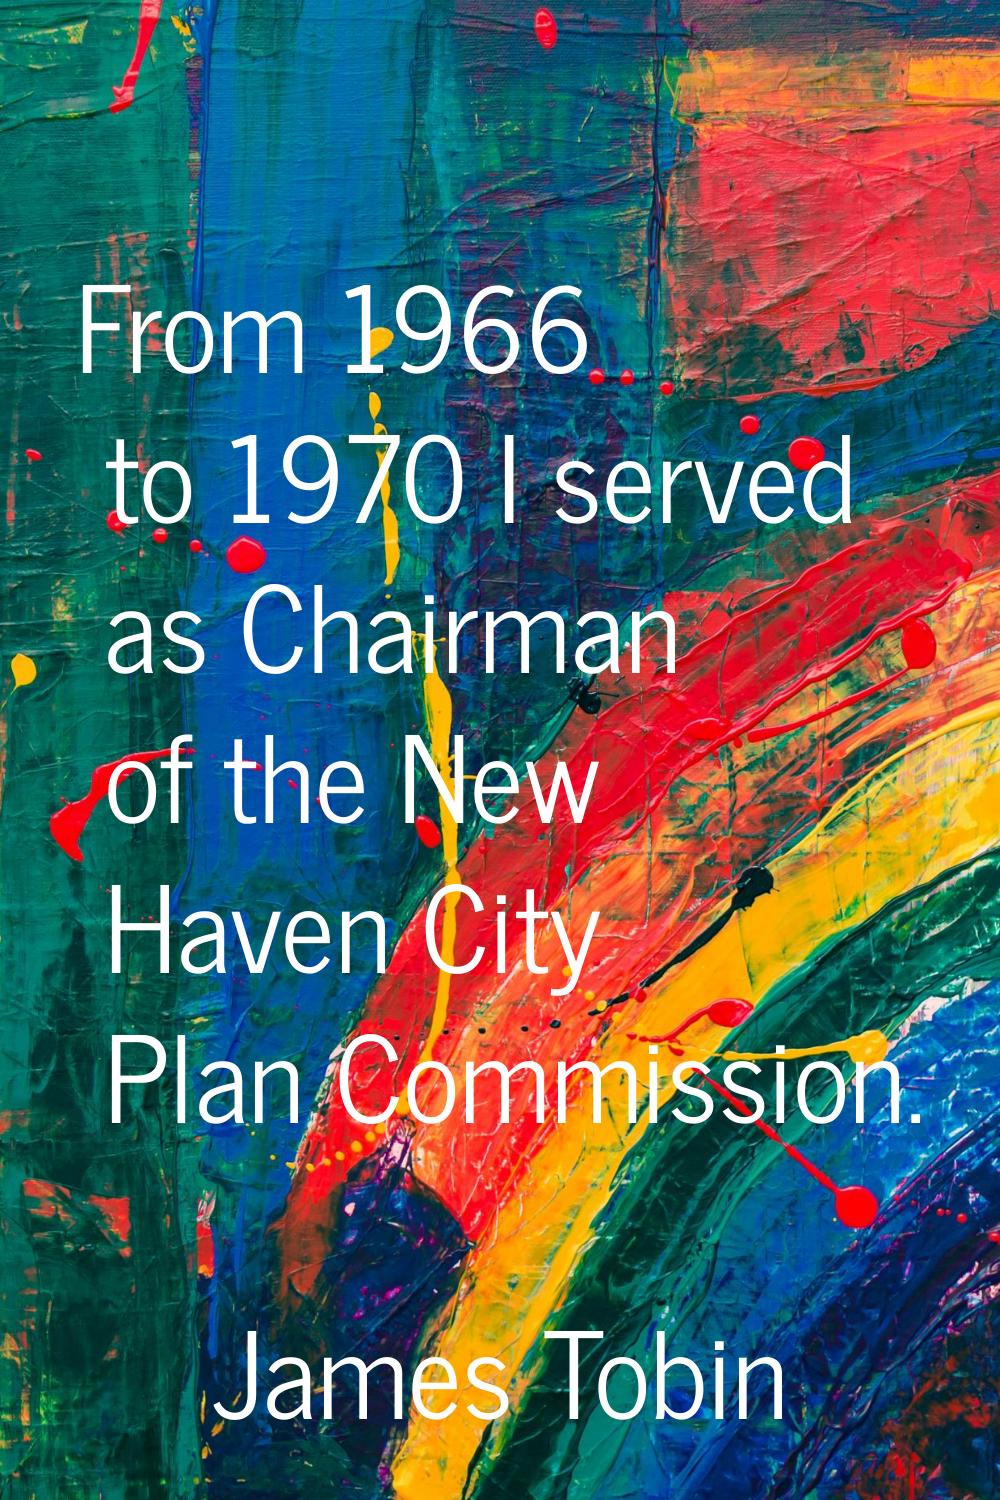 From 1966 to 1970 I served as Chairman of the New Haven City Plan Commission.